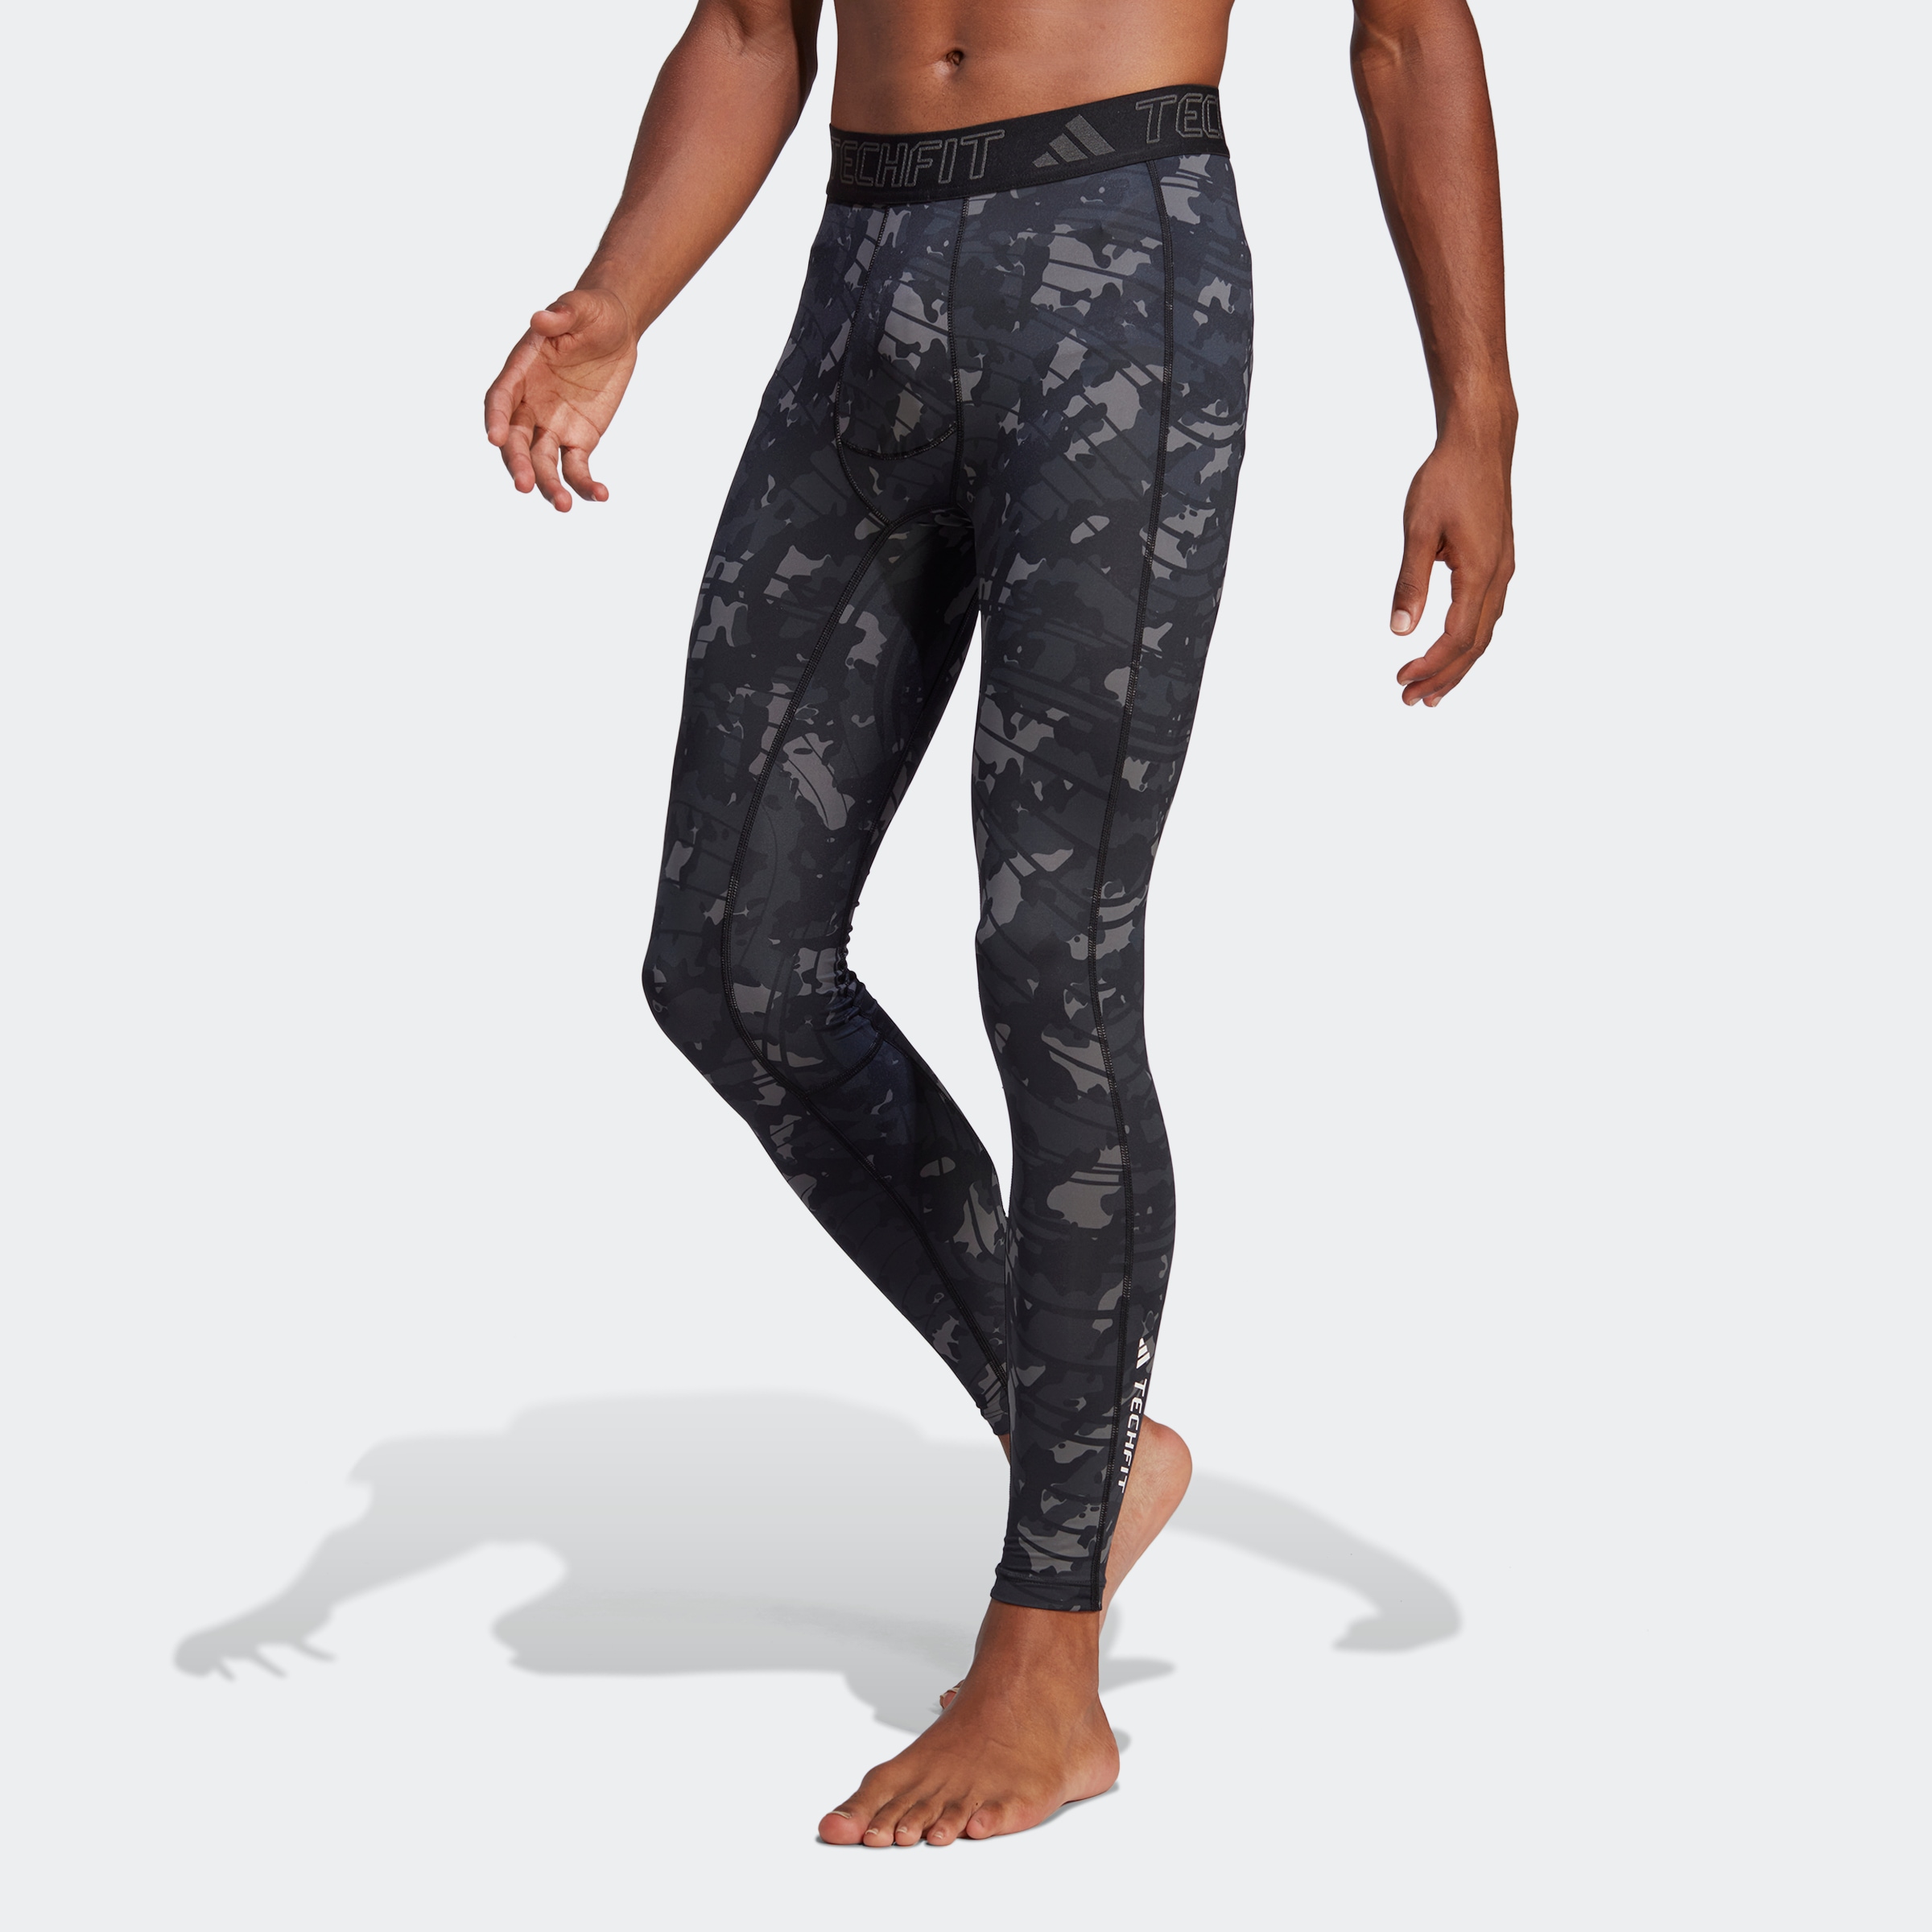 Nike Pro Training tights in all over camo print